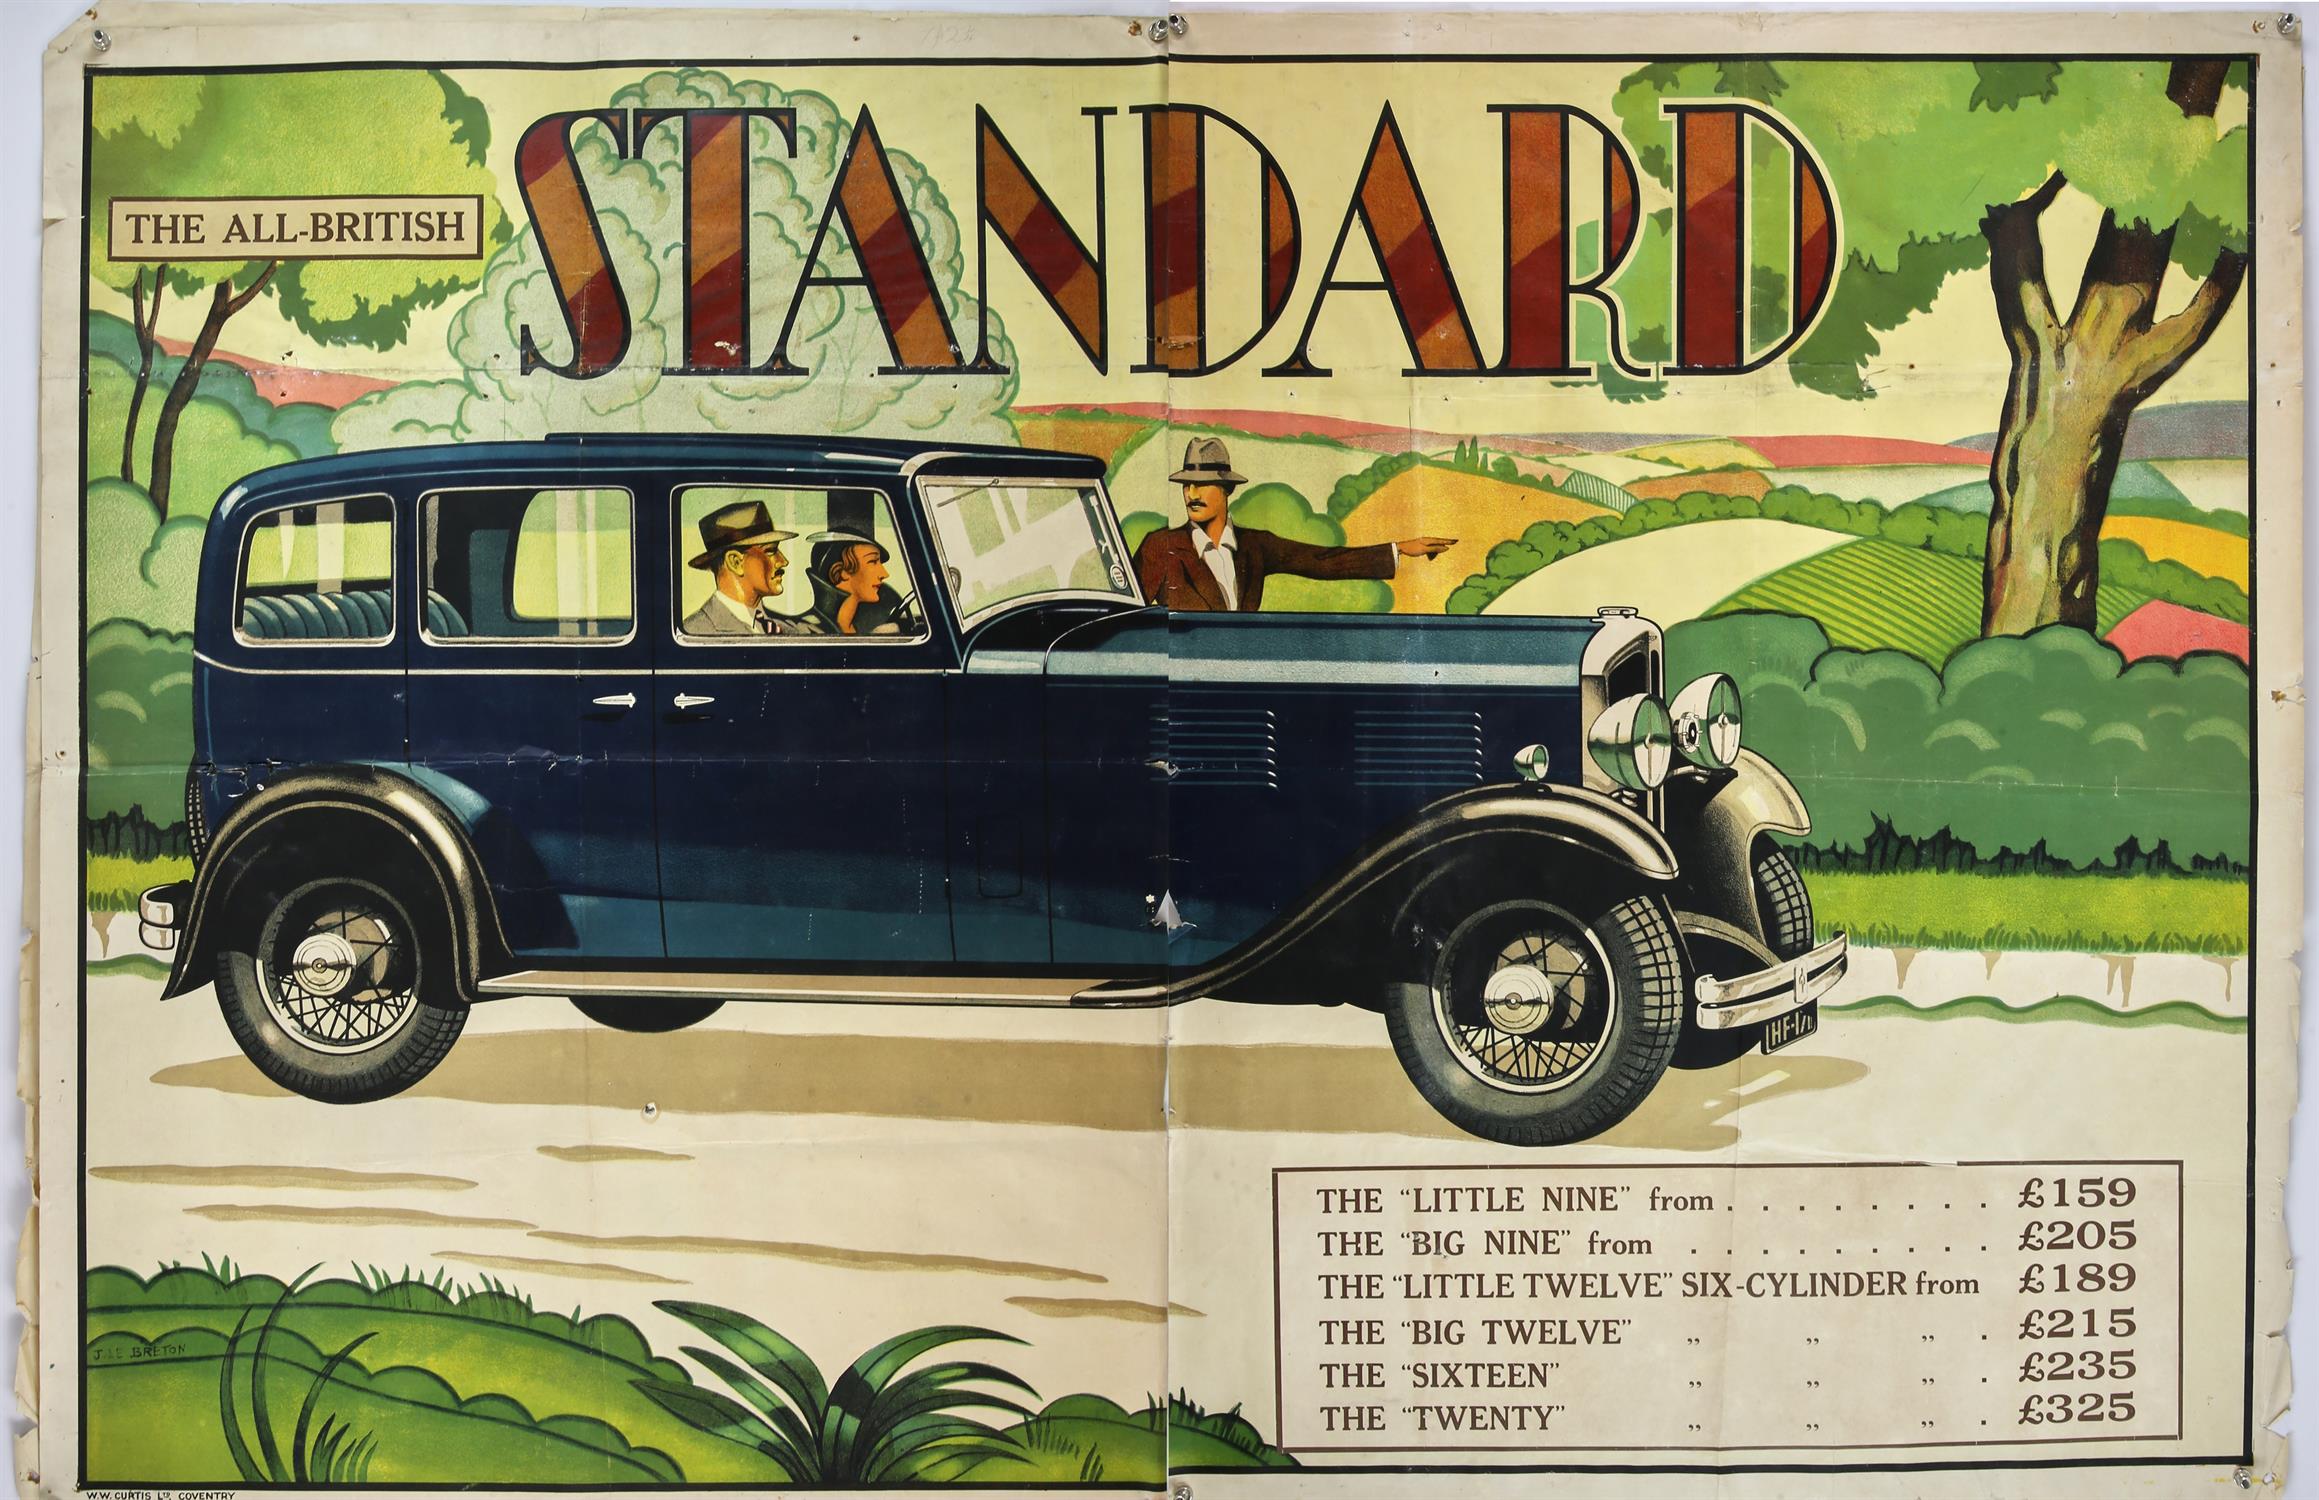 The All British Standard - Vintage advertising poster, circa 1932, artwork by Breton and printed by